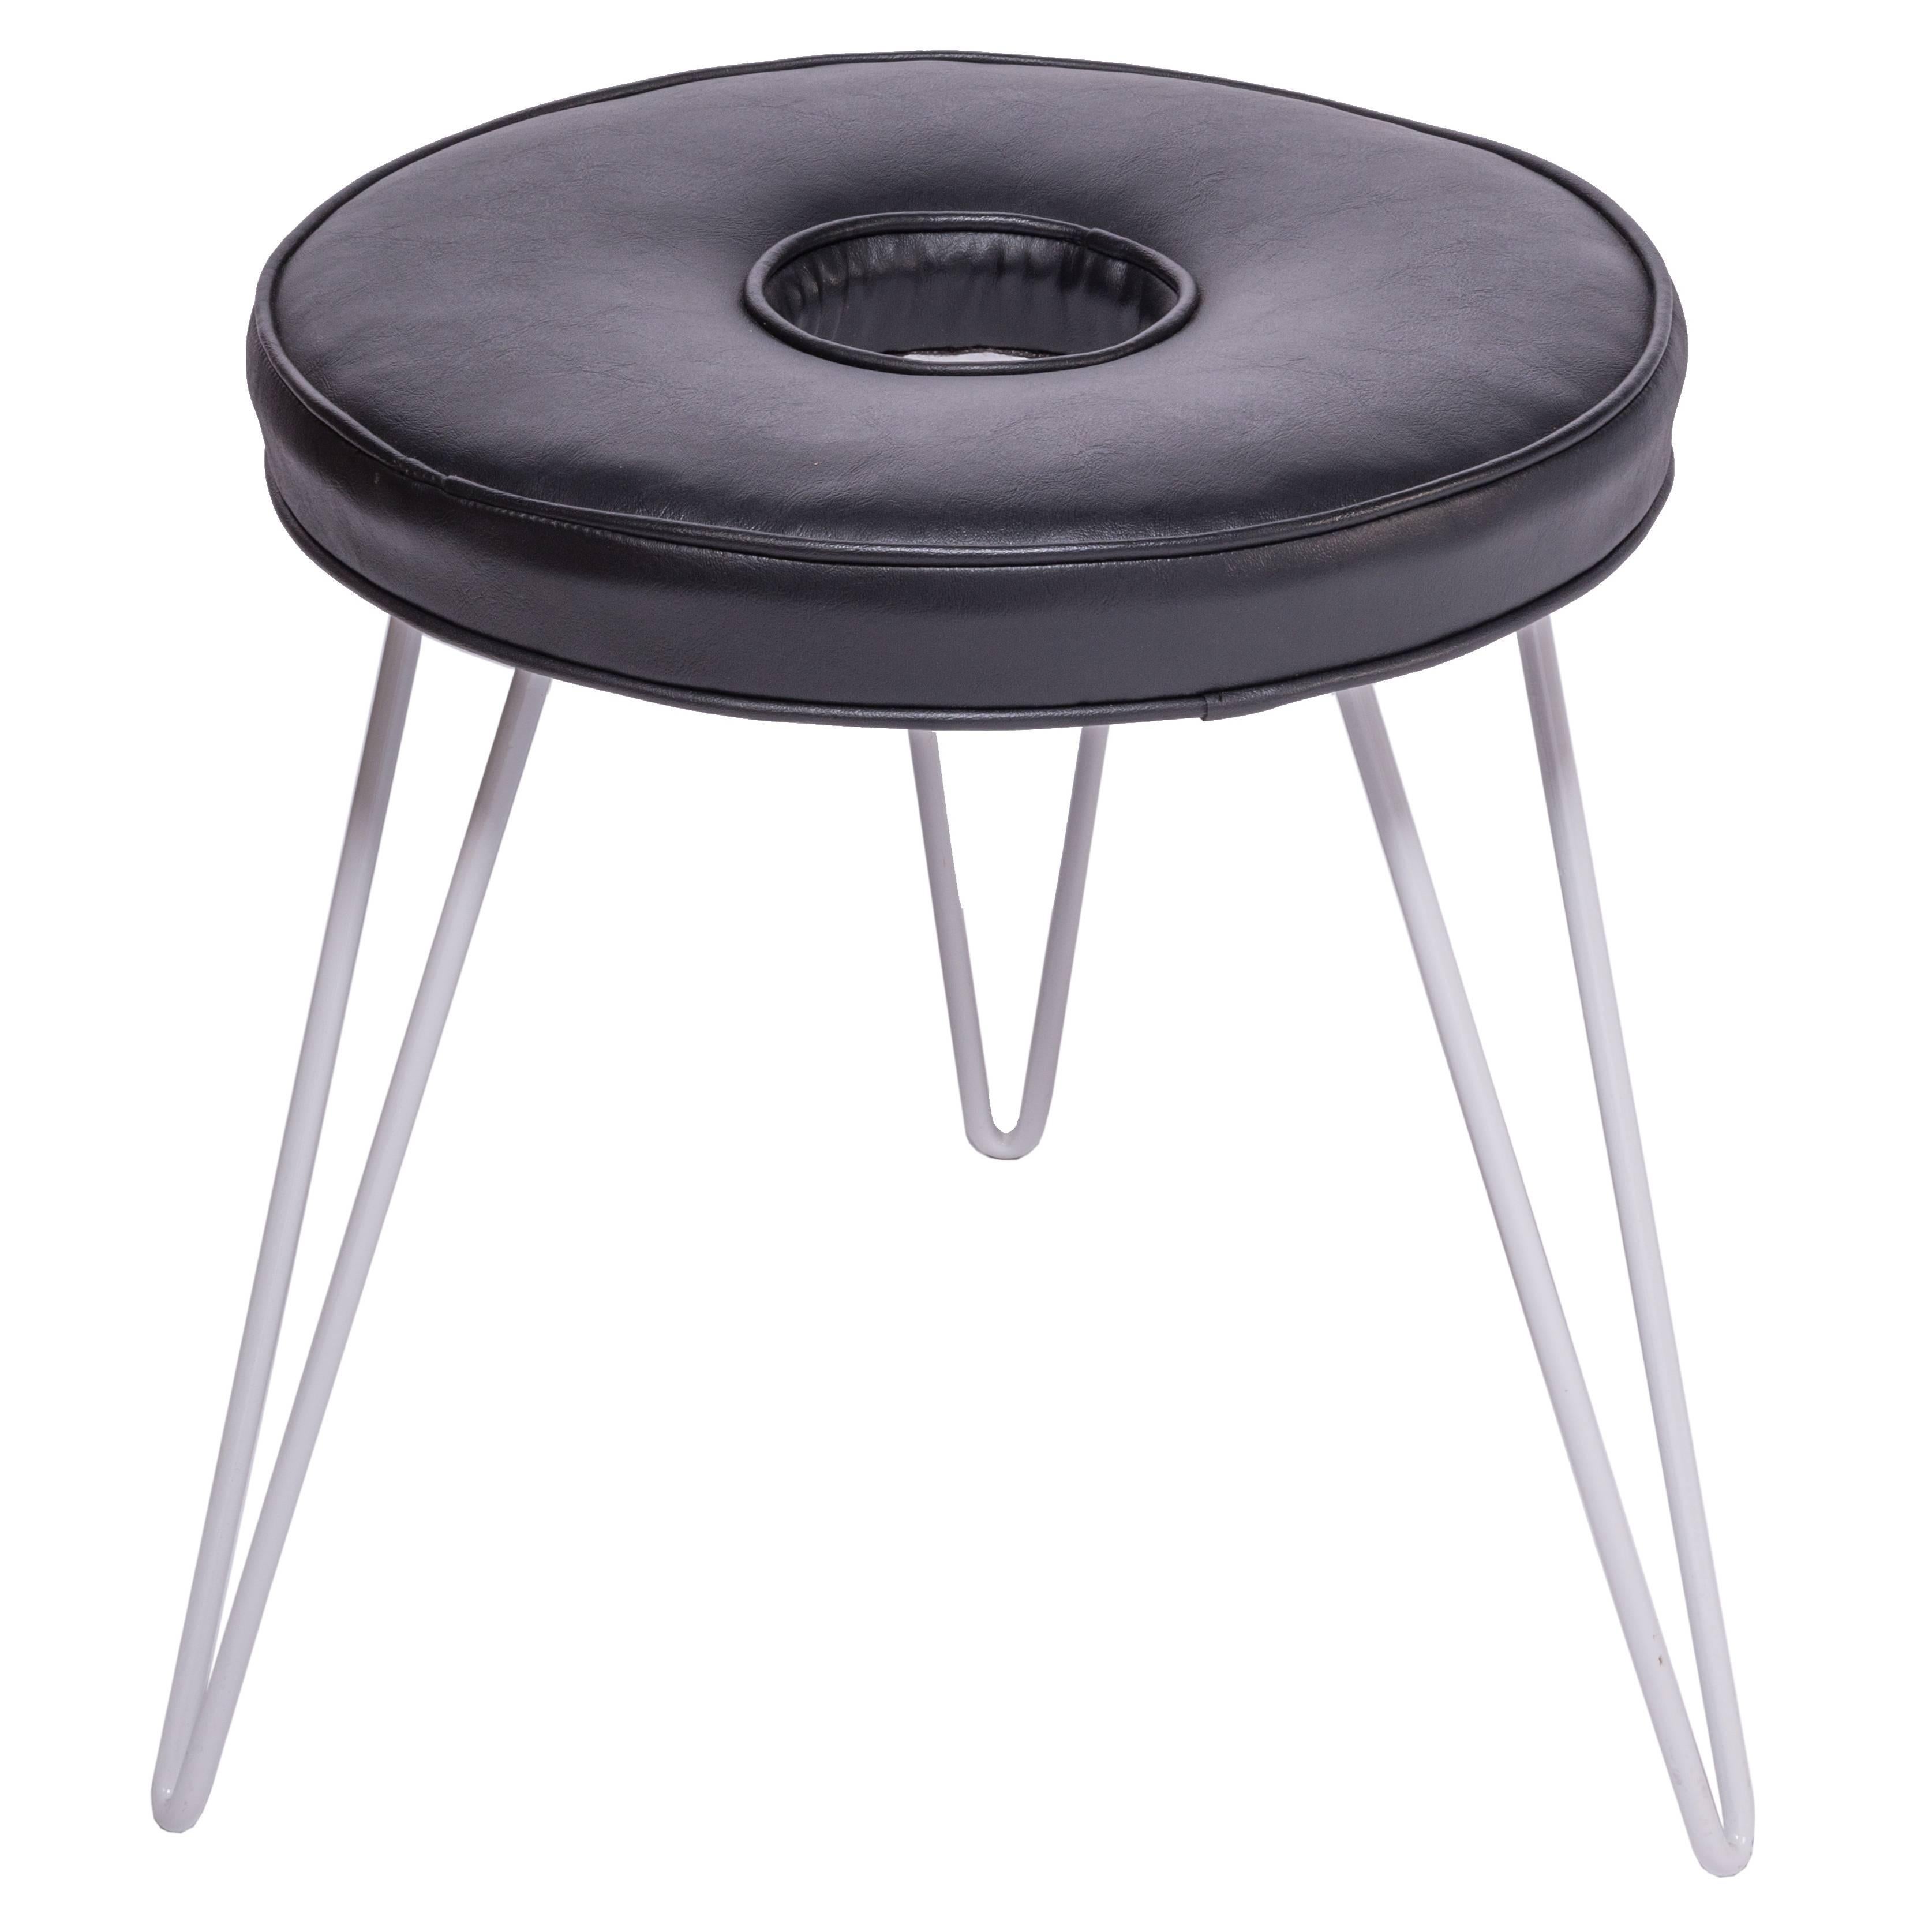 William Armbruster Donut Stool MoMA